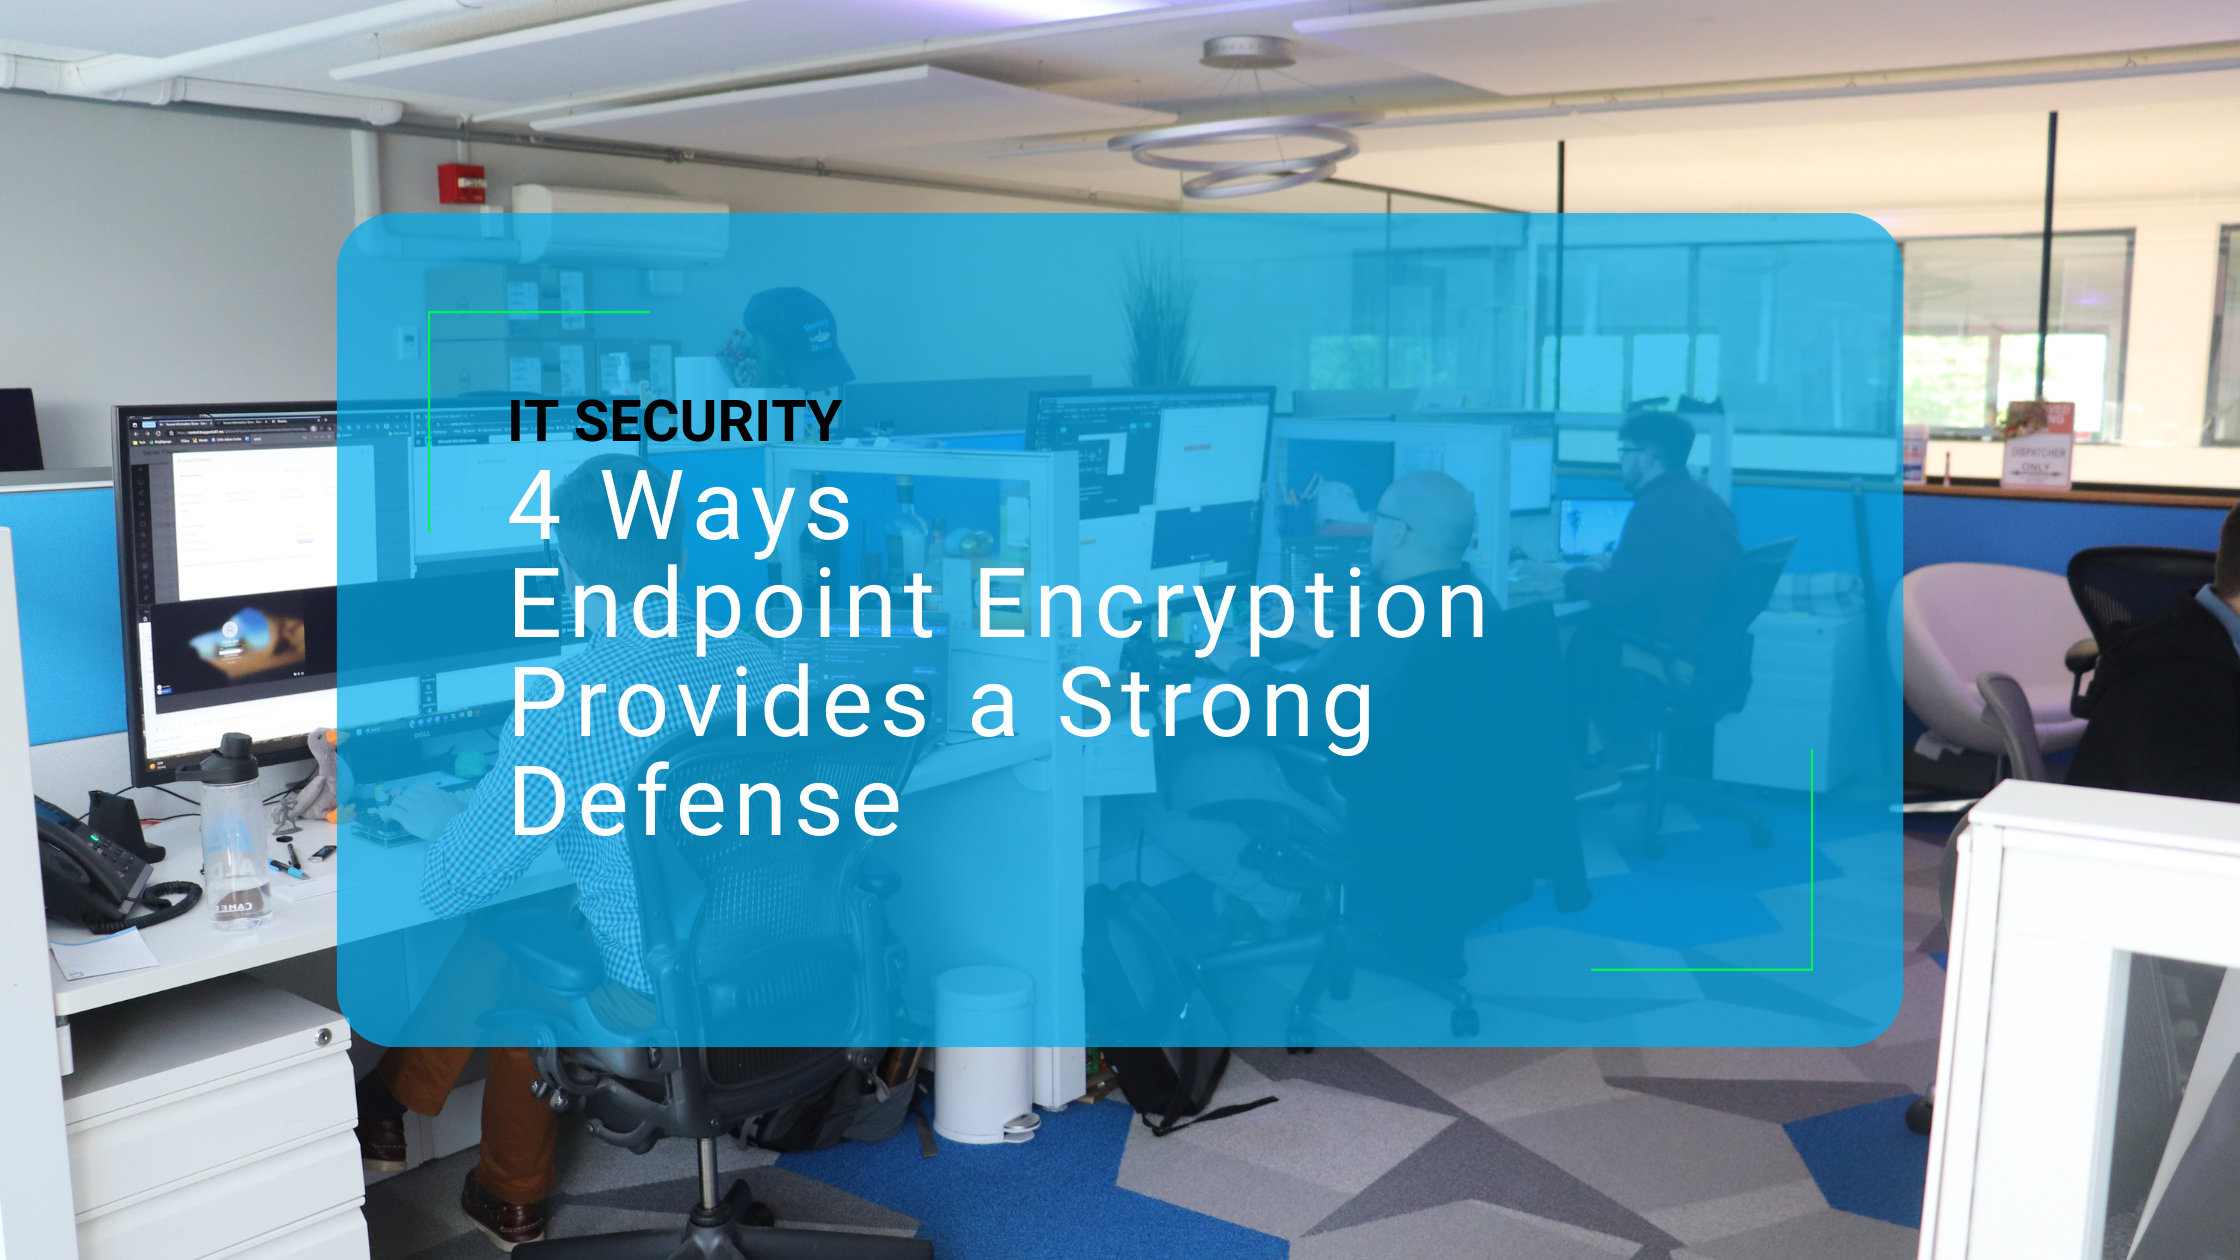 IT Security: 4 Ways Endpoint Encryption Provides a Strong Defense